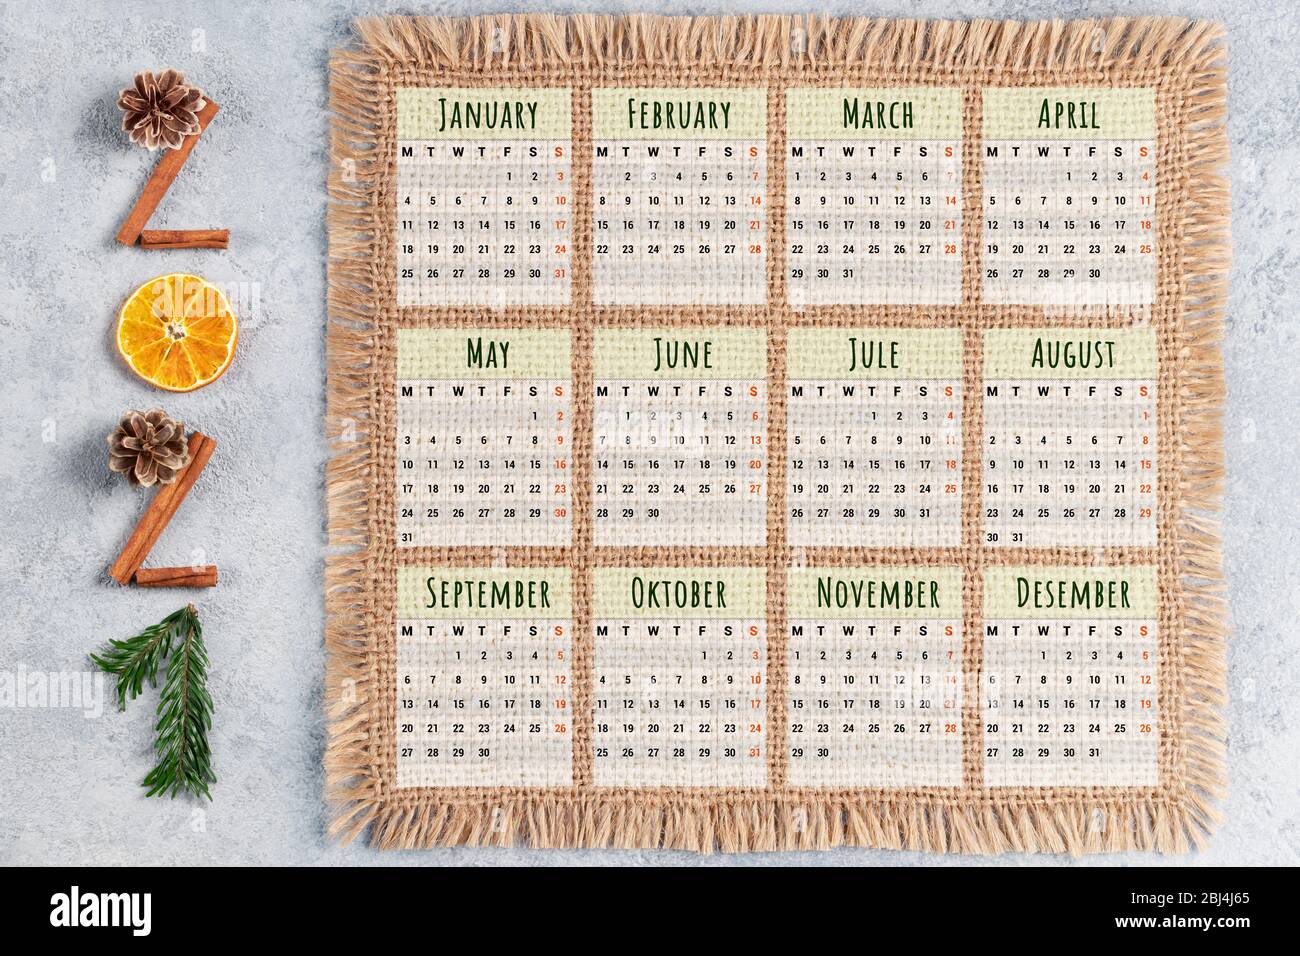 Eco friendly and zero waste pocket or advertising calendar for 2021. Figures from natural materials, the week starts on Monday. Stock Photo